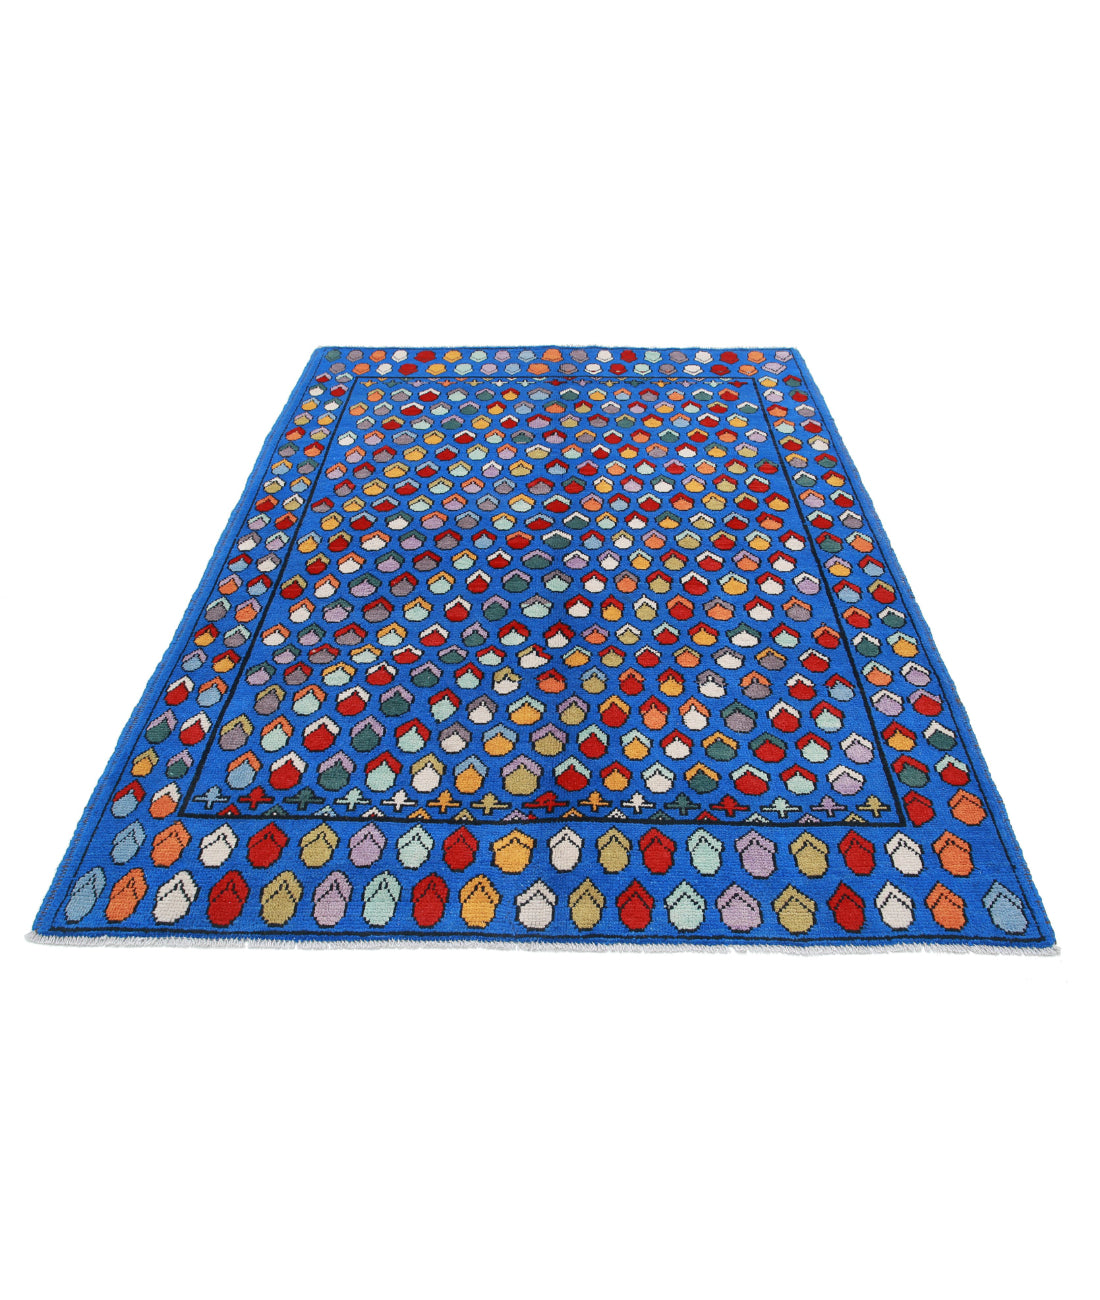 Revival 5'7'' X 7'7'' Hand-Knotted Wool Rug 5'7'' x 7'7'' (168 X 228) / Blue / Red